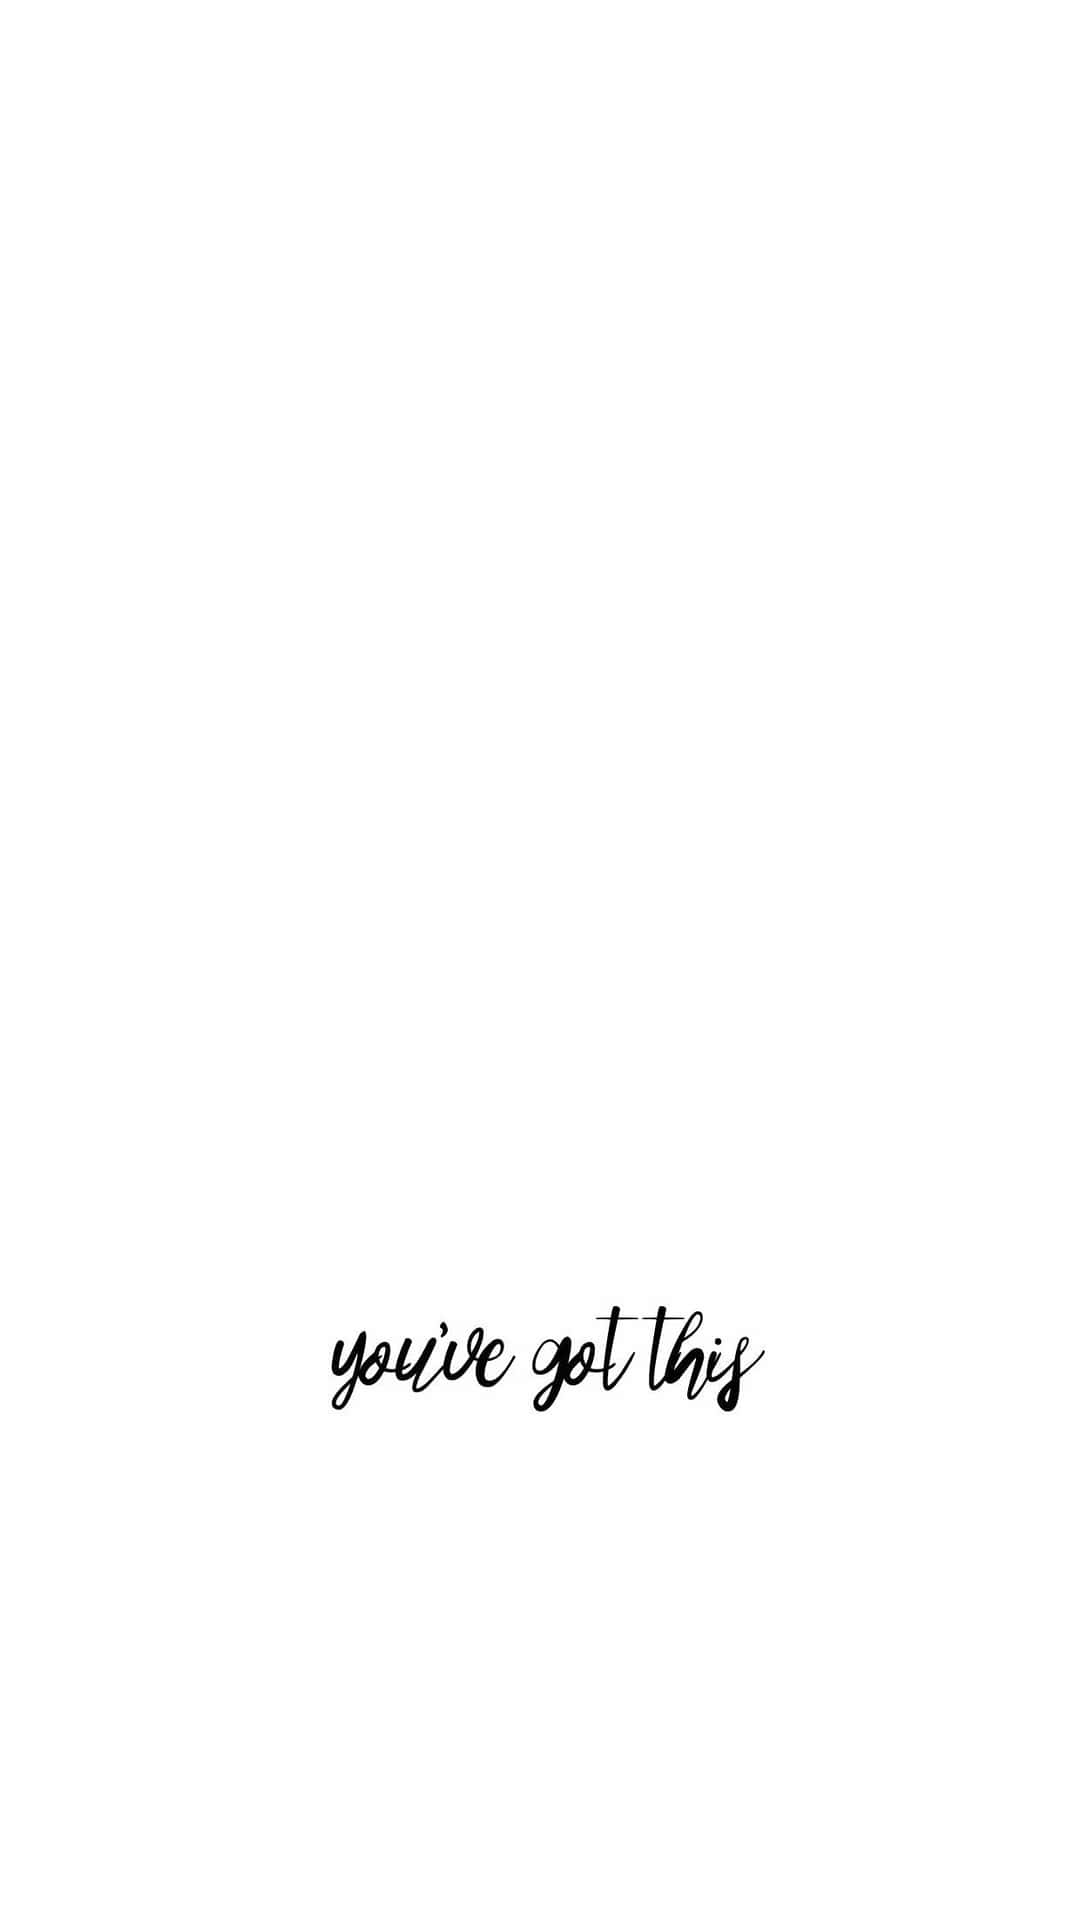 You've Got This Quotes Tumblr